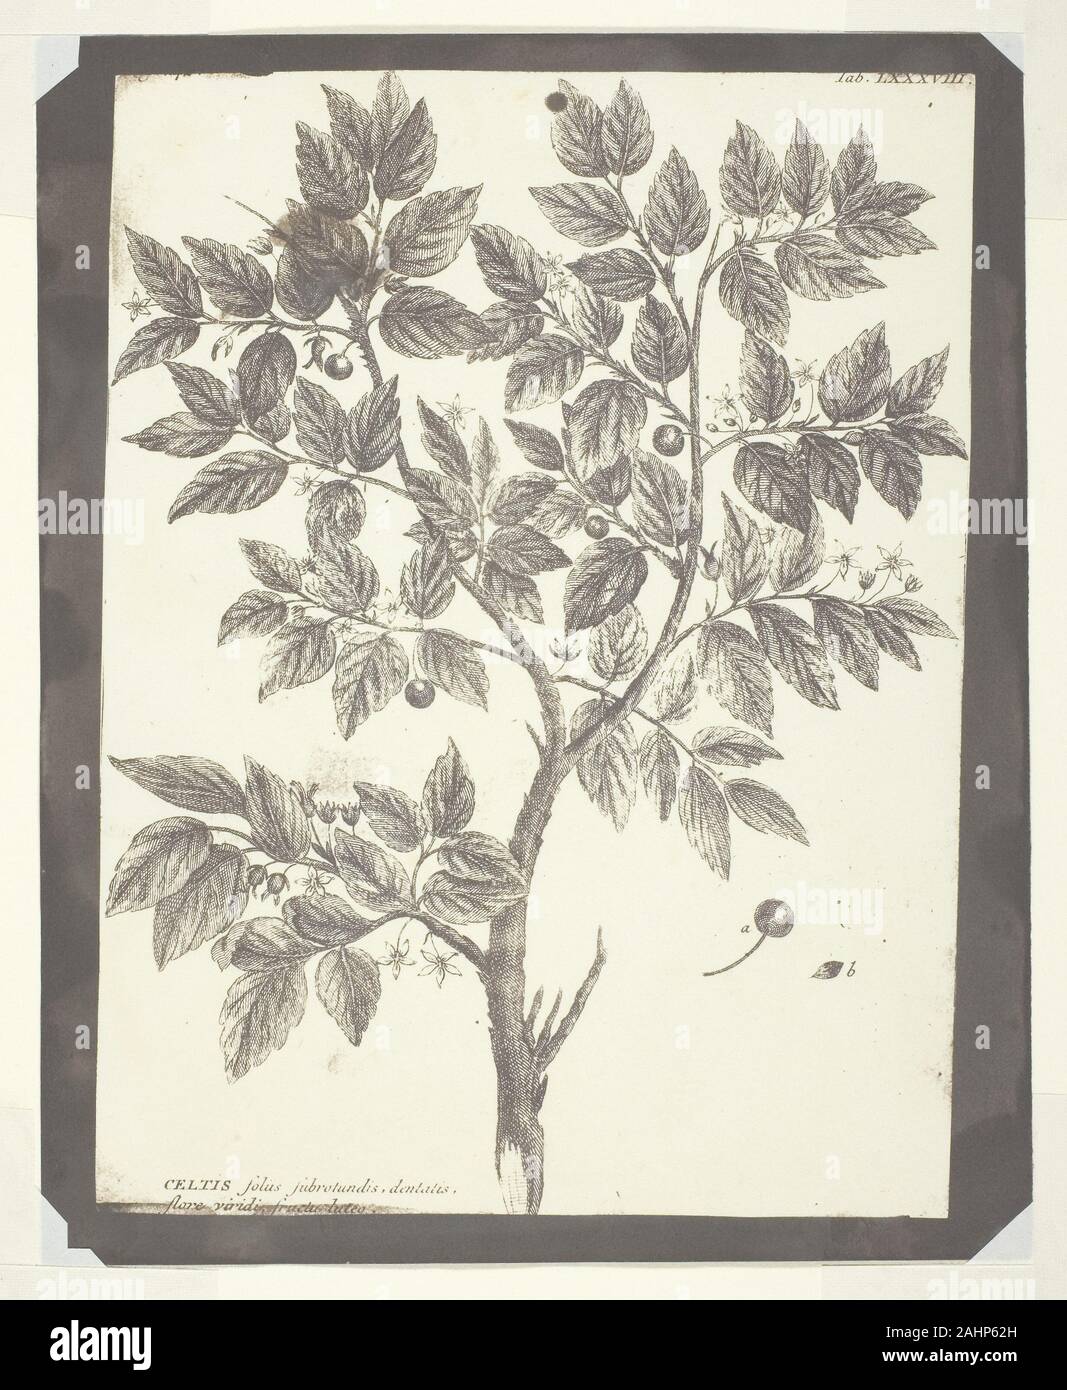 William Henry Fox Talbot. Copy of Botanical Engraving of Celtis. 1840–1845. England. Salted paper print Stock Photo